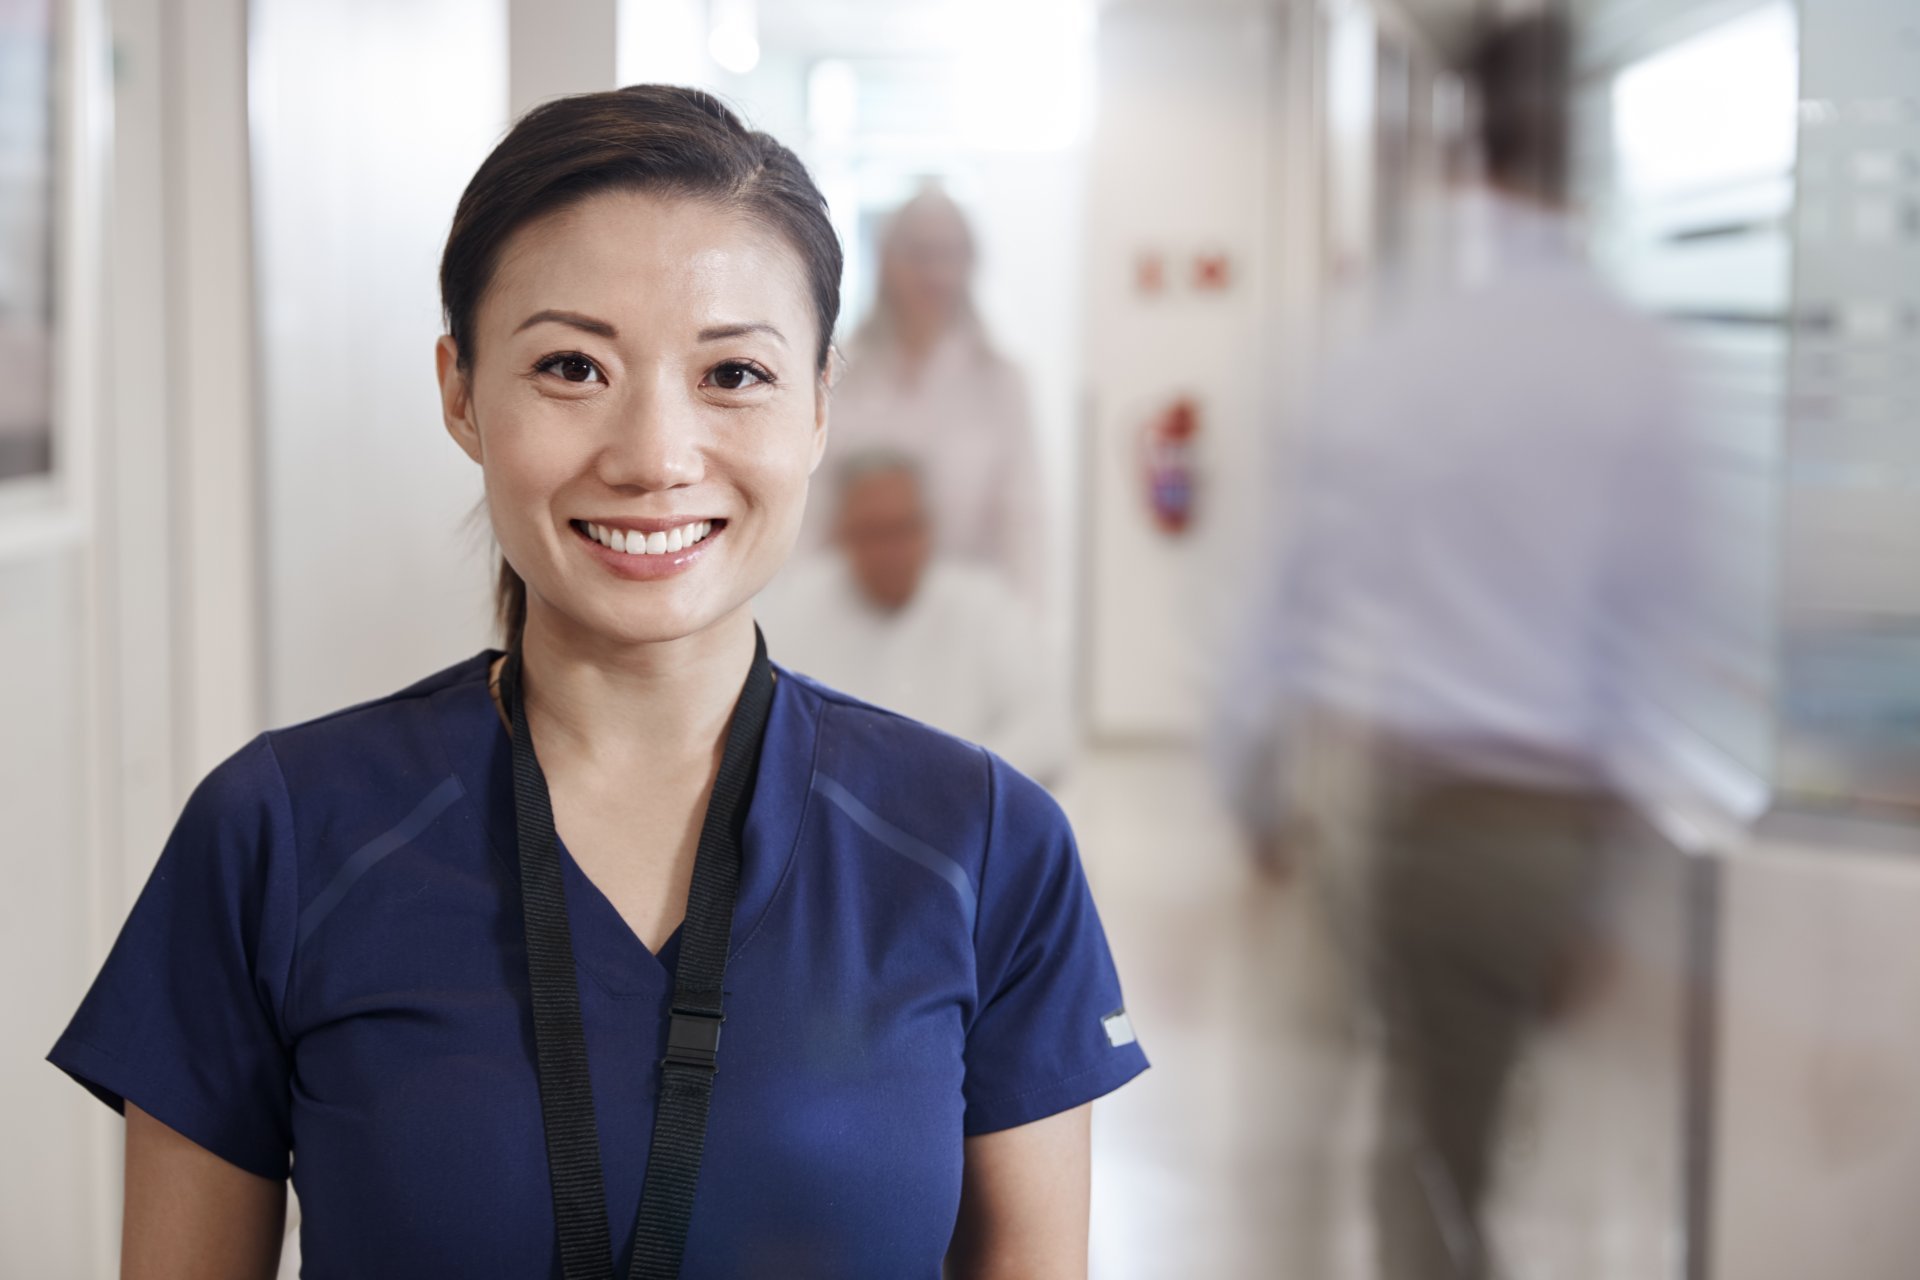 A smiling female nurse stands among a crowded hospital corridor.